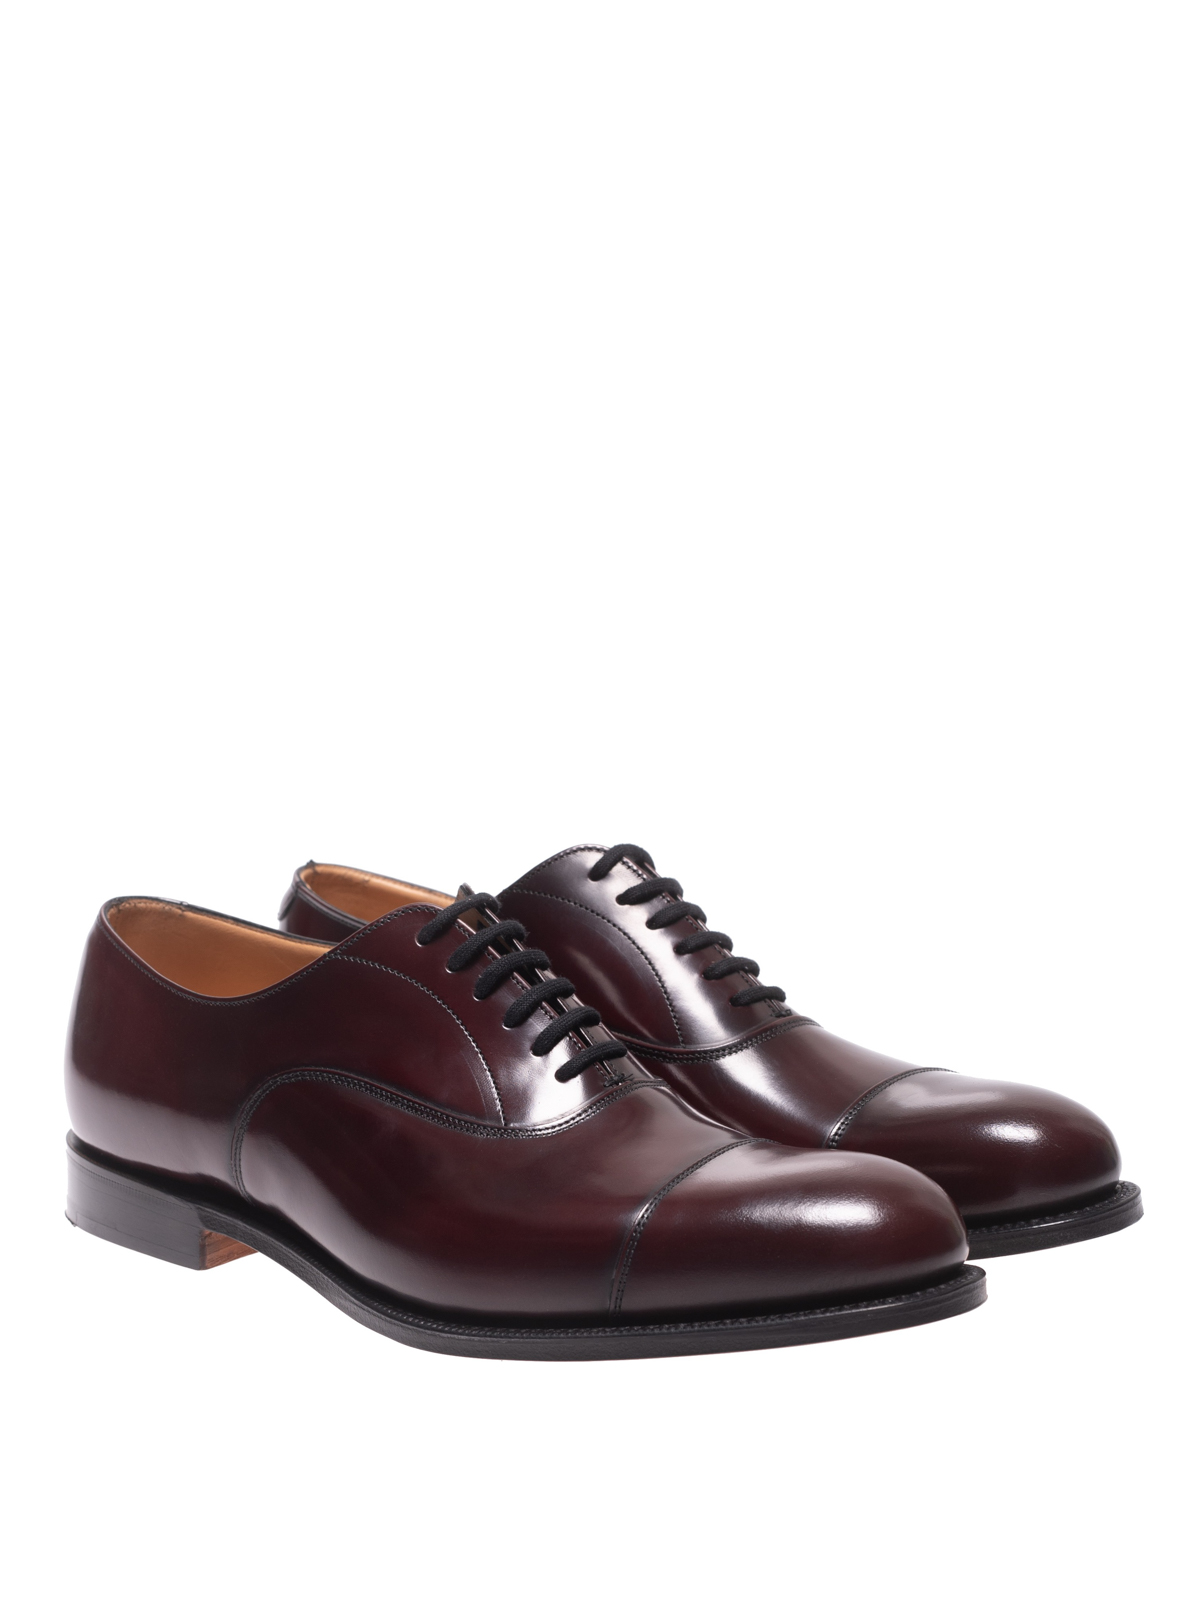 Burgundy Church Shoes Top Sellers, 54% OFF | www.velocityusa.com